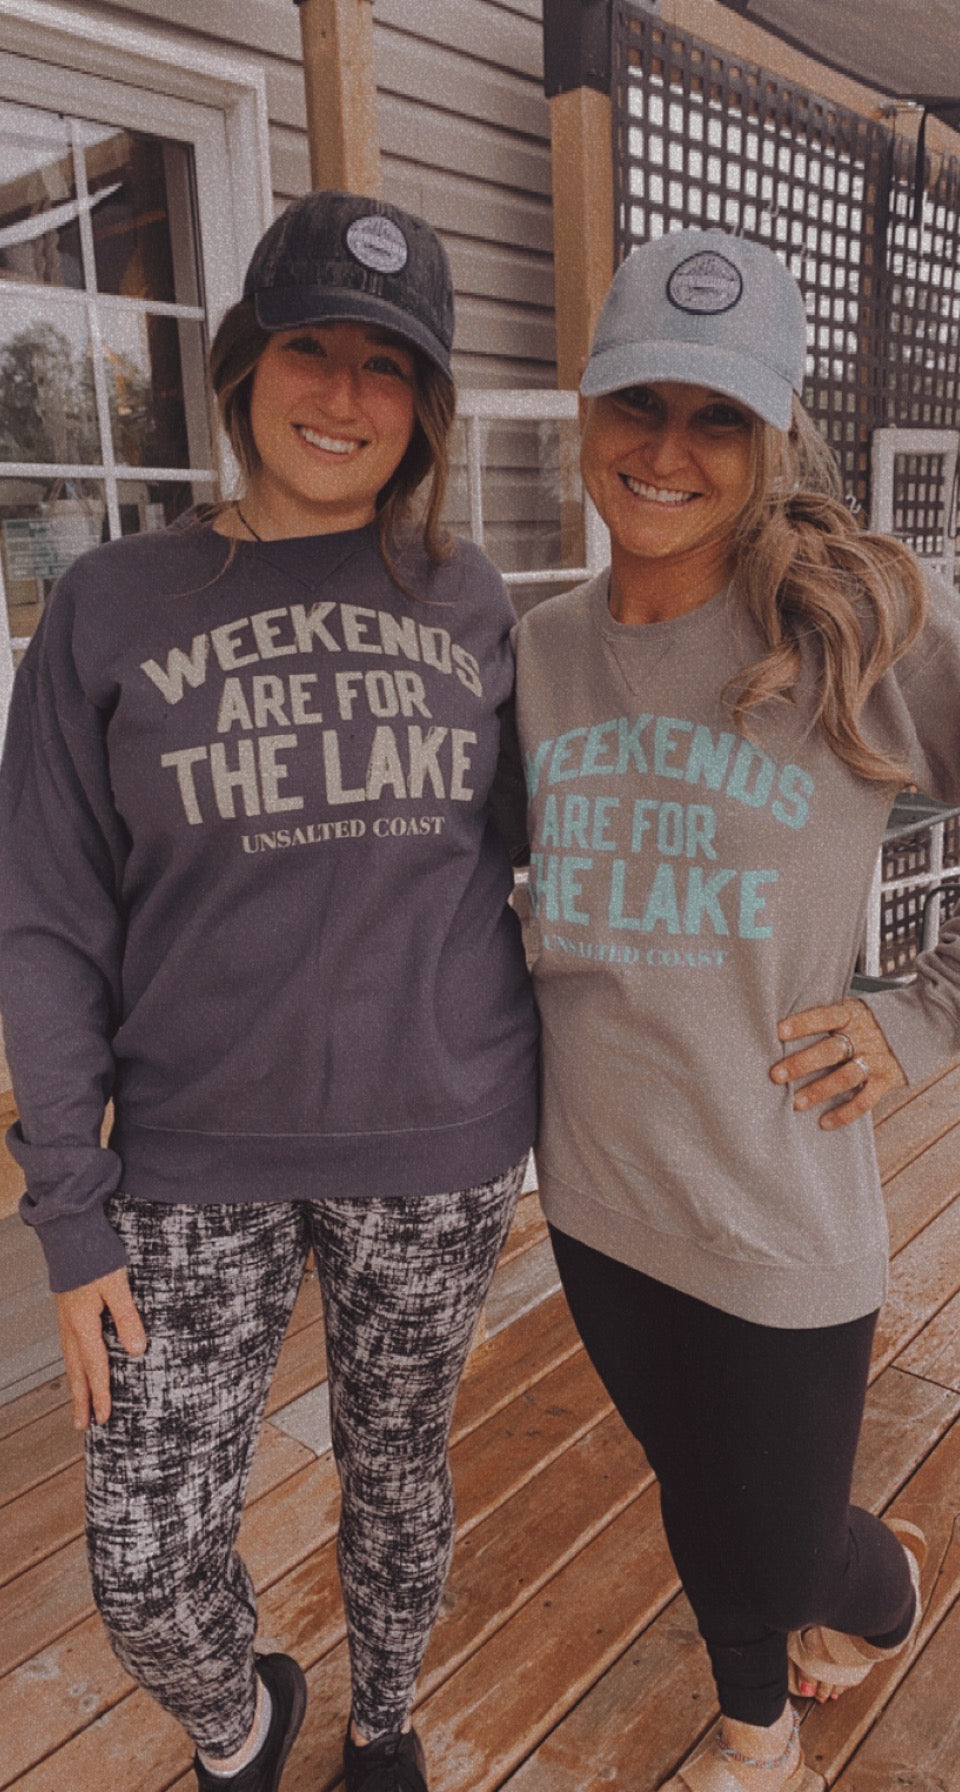 Weekends are for the Lake - unisex crew